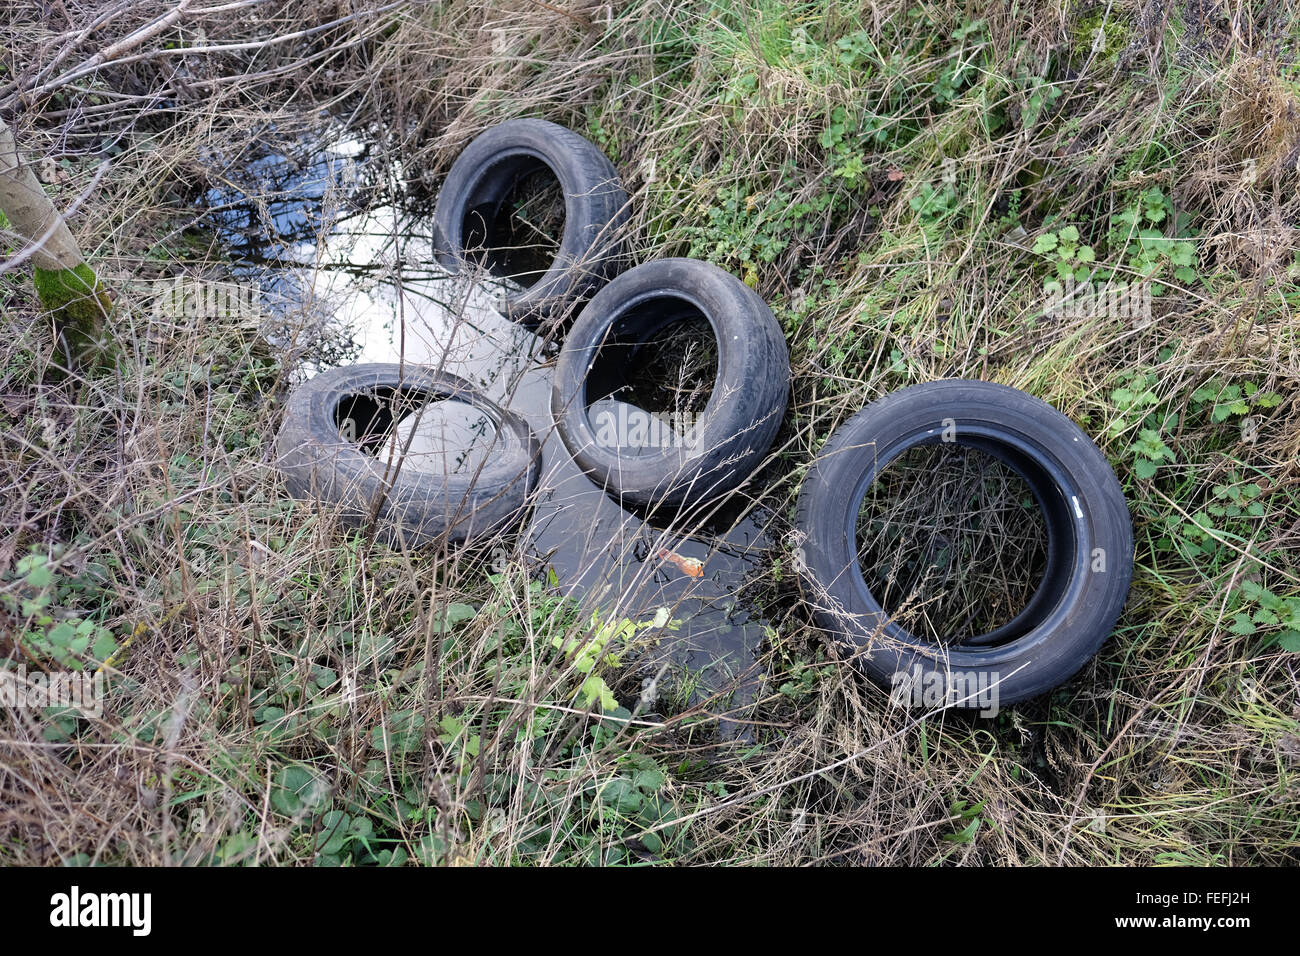 tyres dumped in a ditch Stock Photo